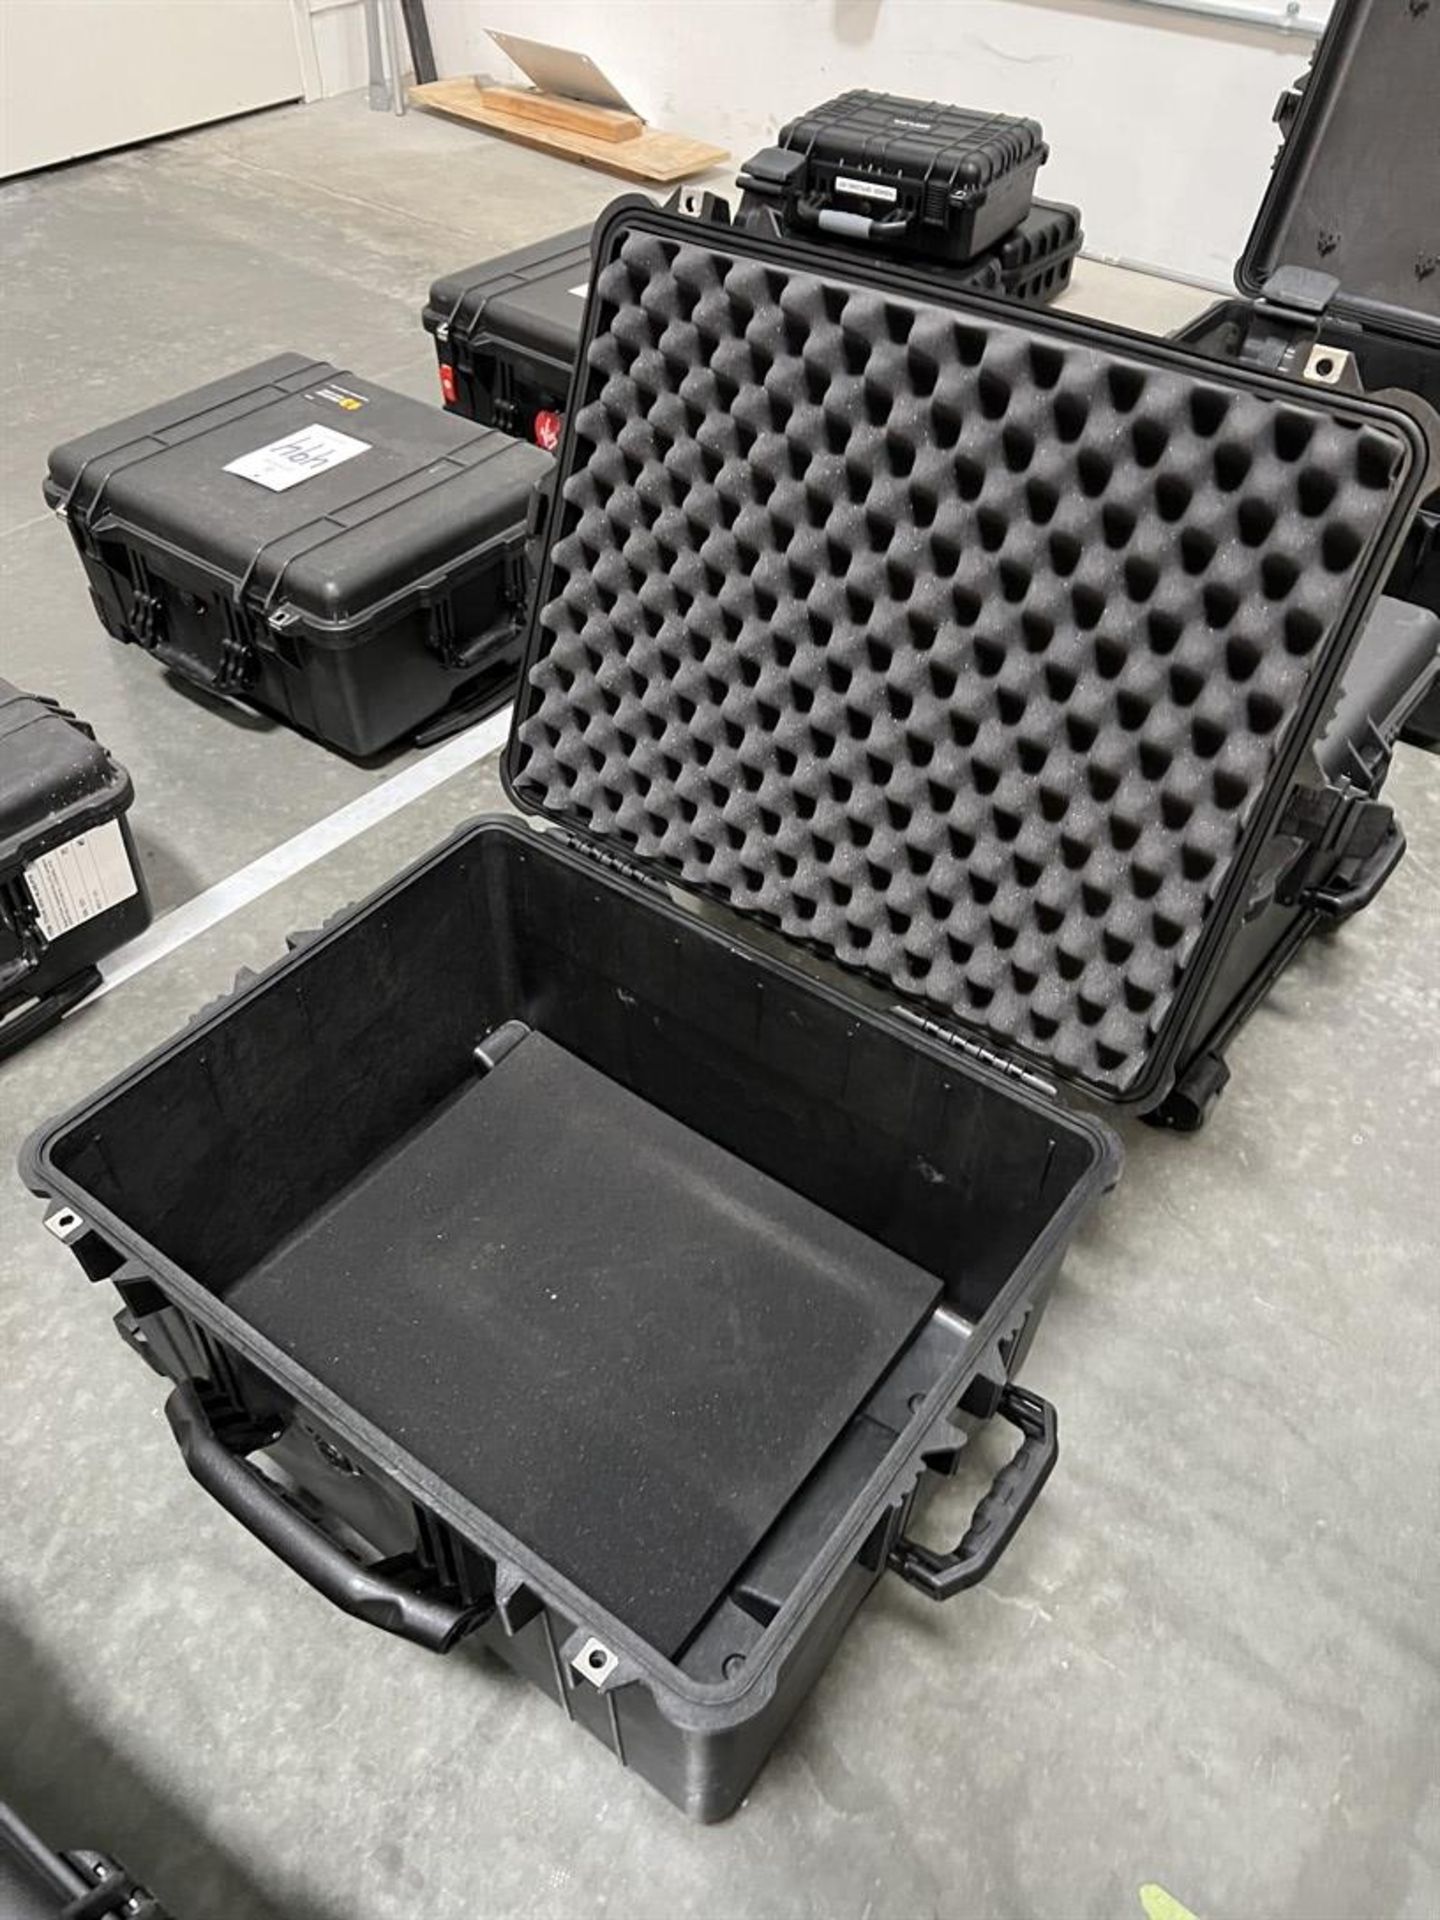 PELICAN 1620 Protective Transport Case - Image 3 of 3